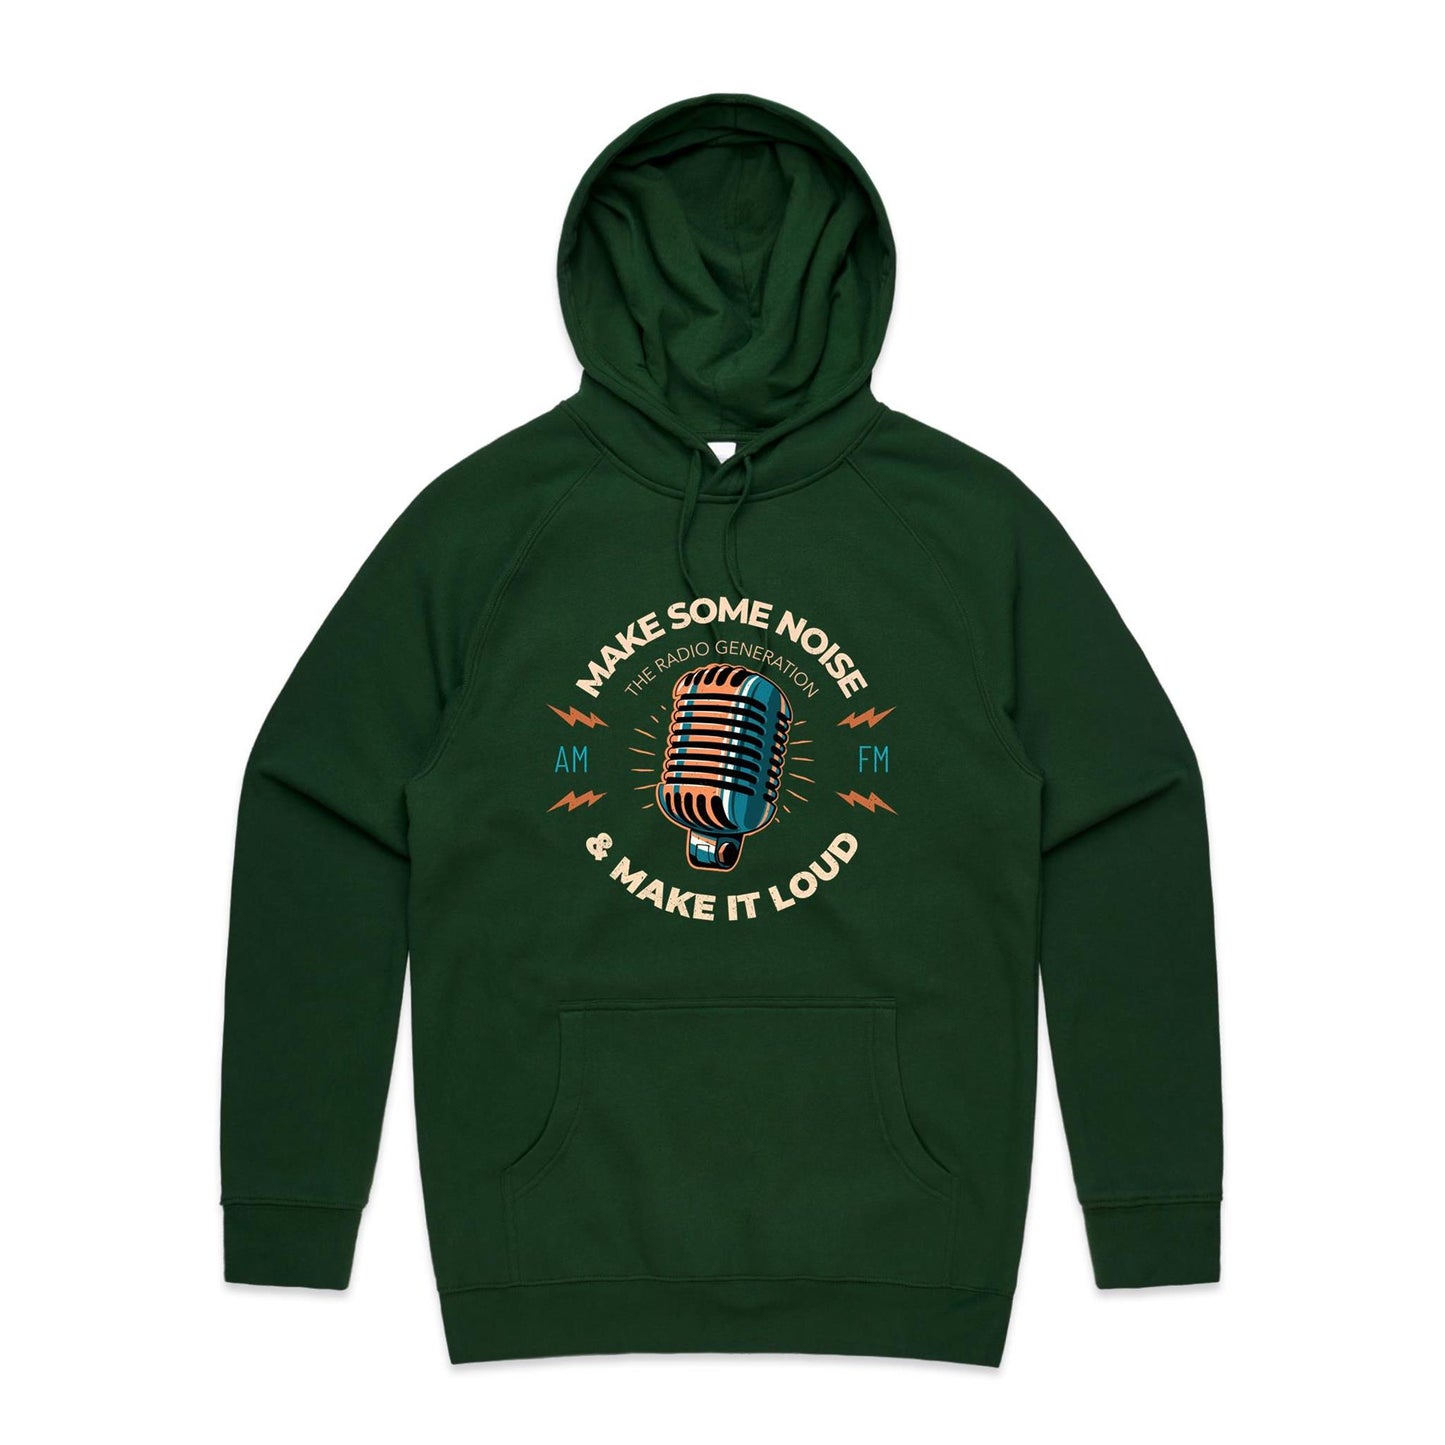 Make Some Noise And Make It Loud - Supply Hood Forest Green Mens Supply Hoodie Music